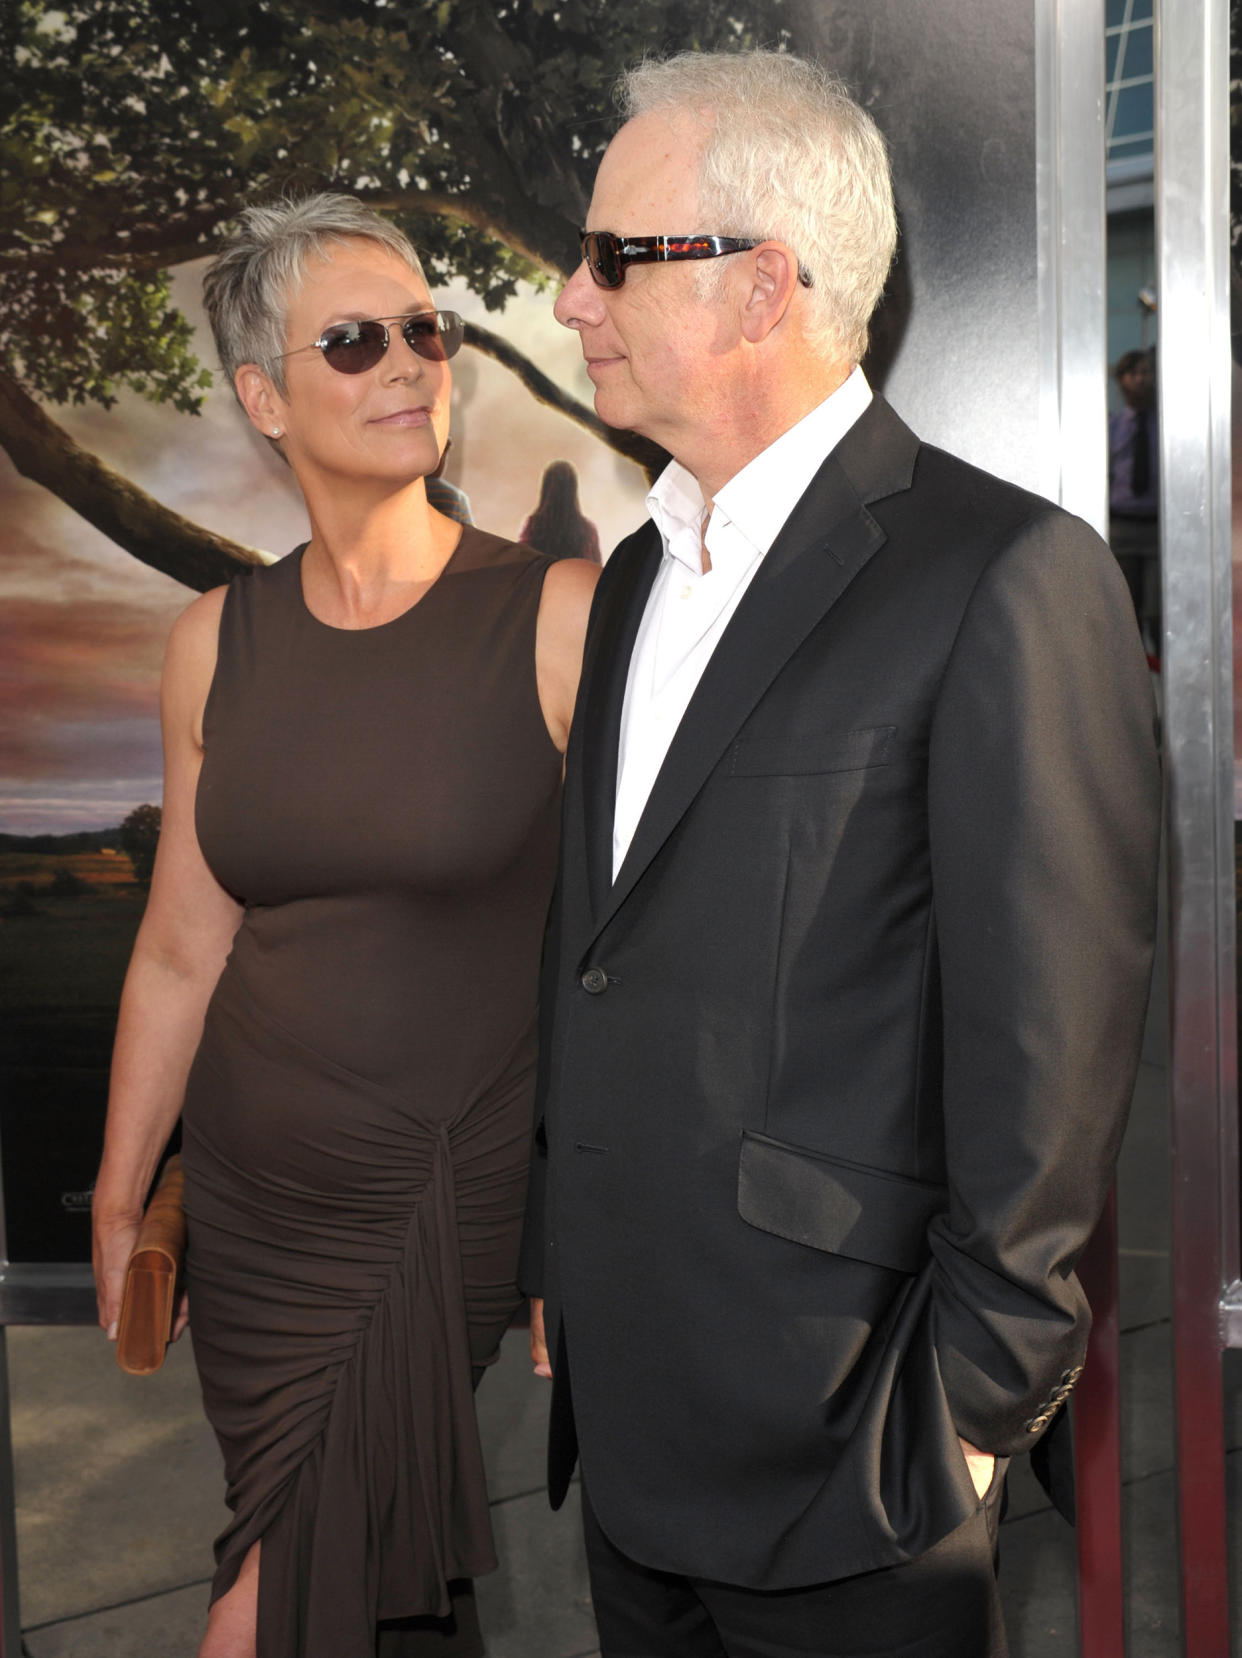 Jamie Lee Curtis and Christopher Guest. (John Shearer / WireImage)